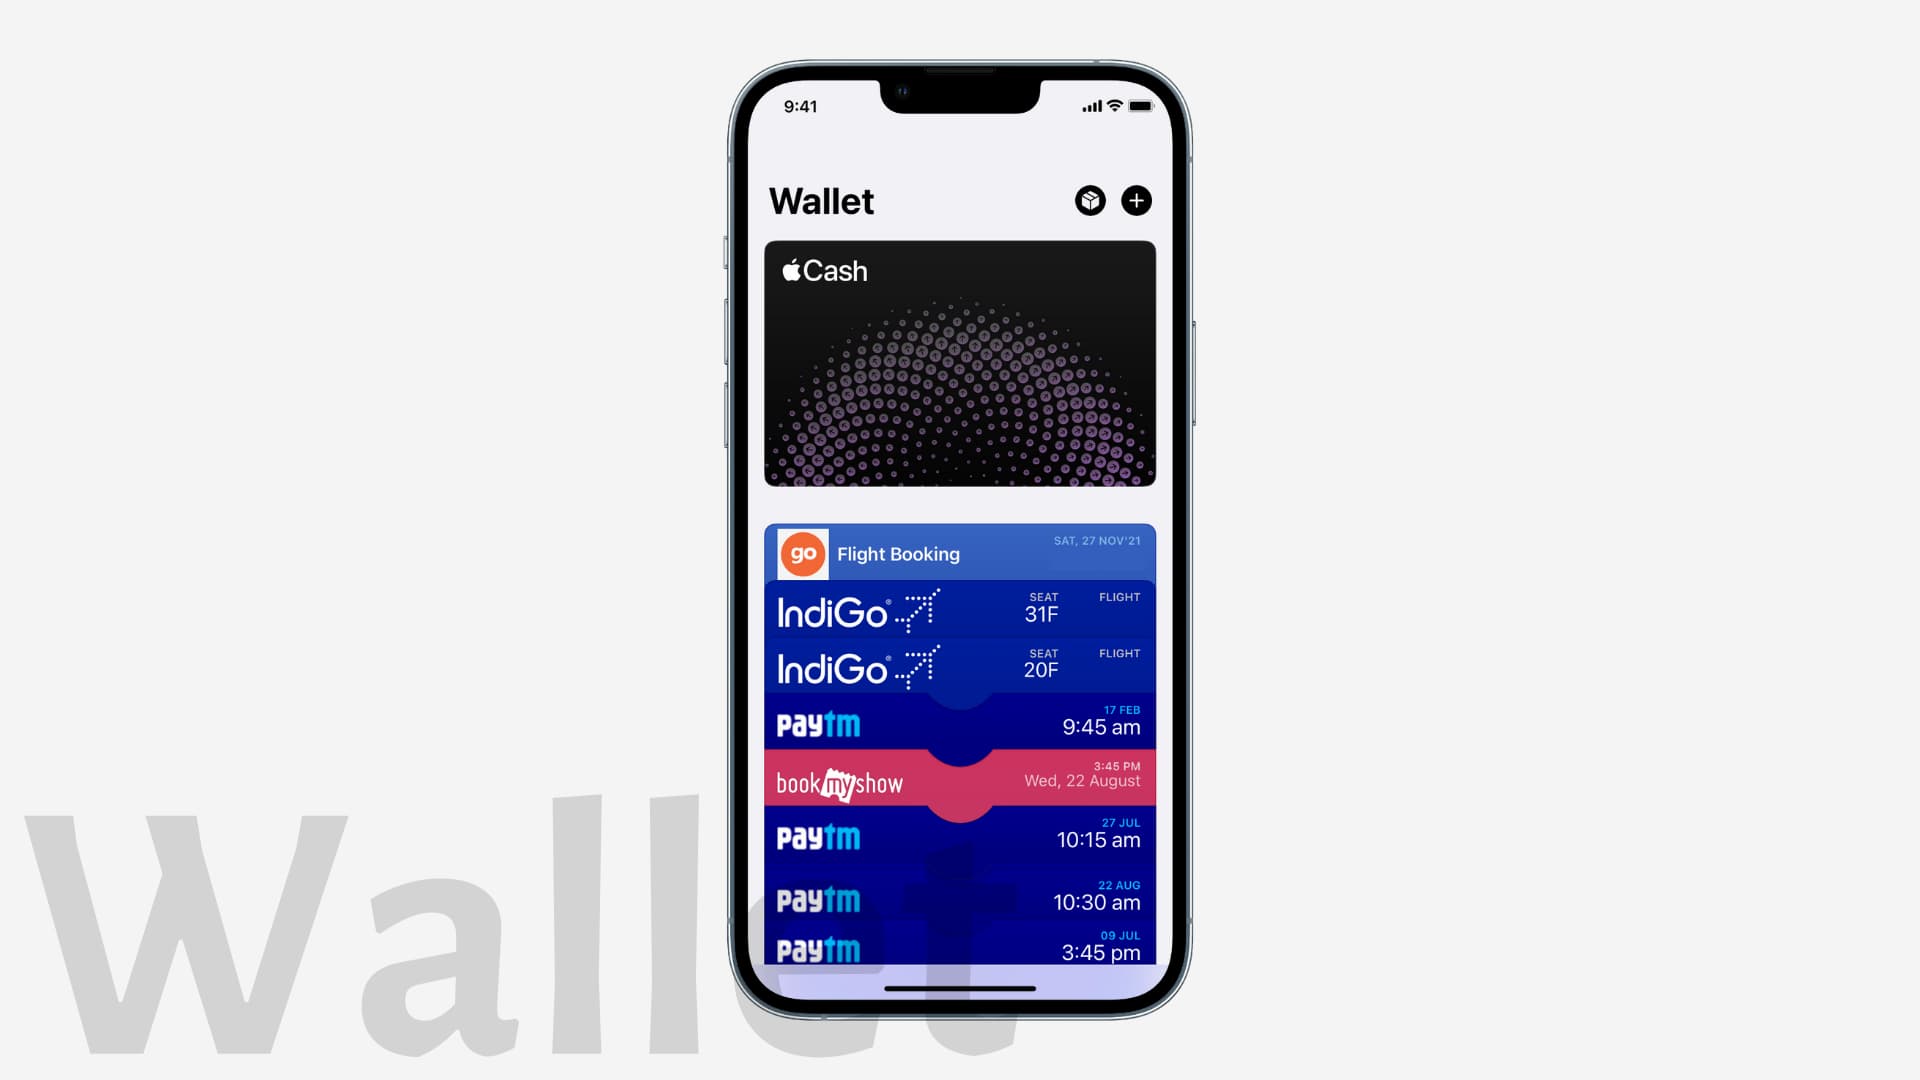 New Wallet features in iOS 16